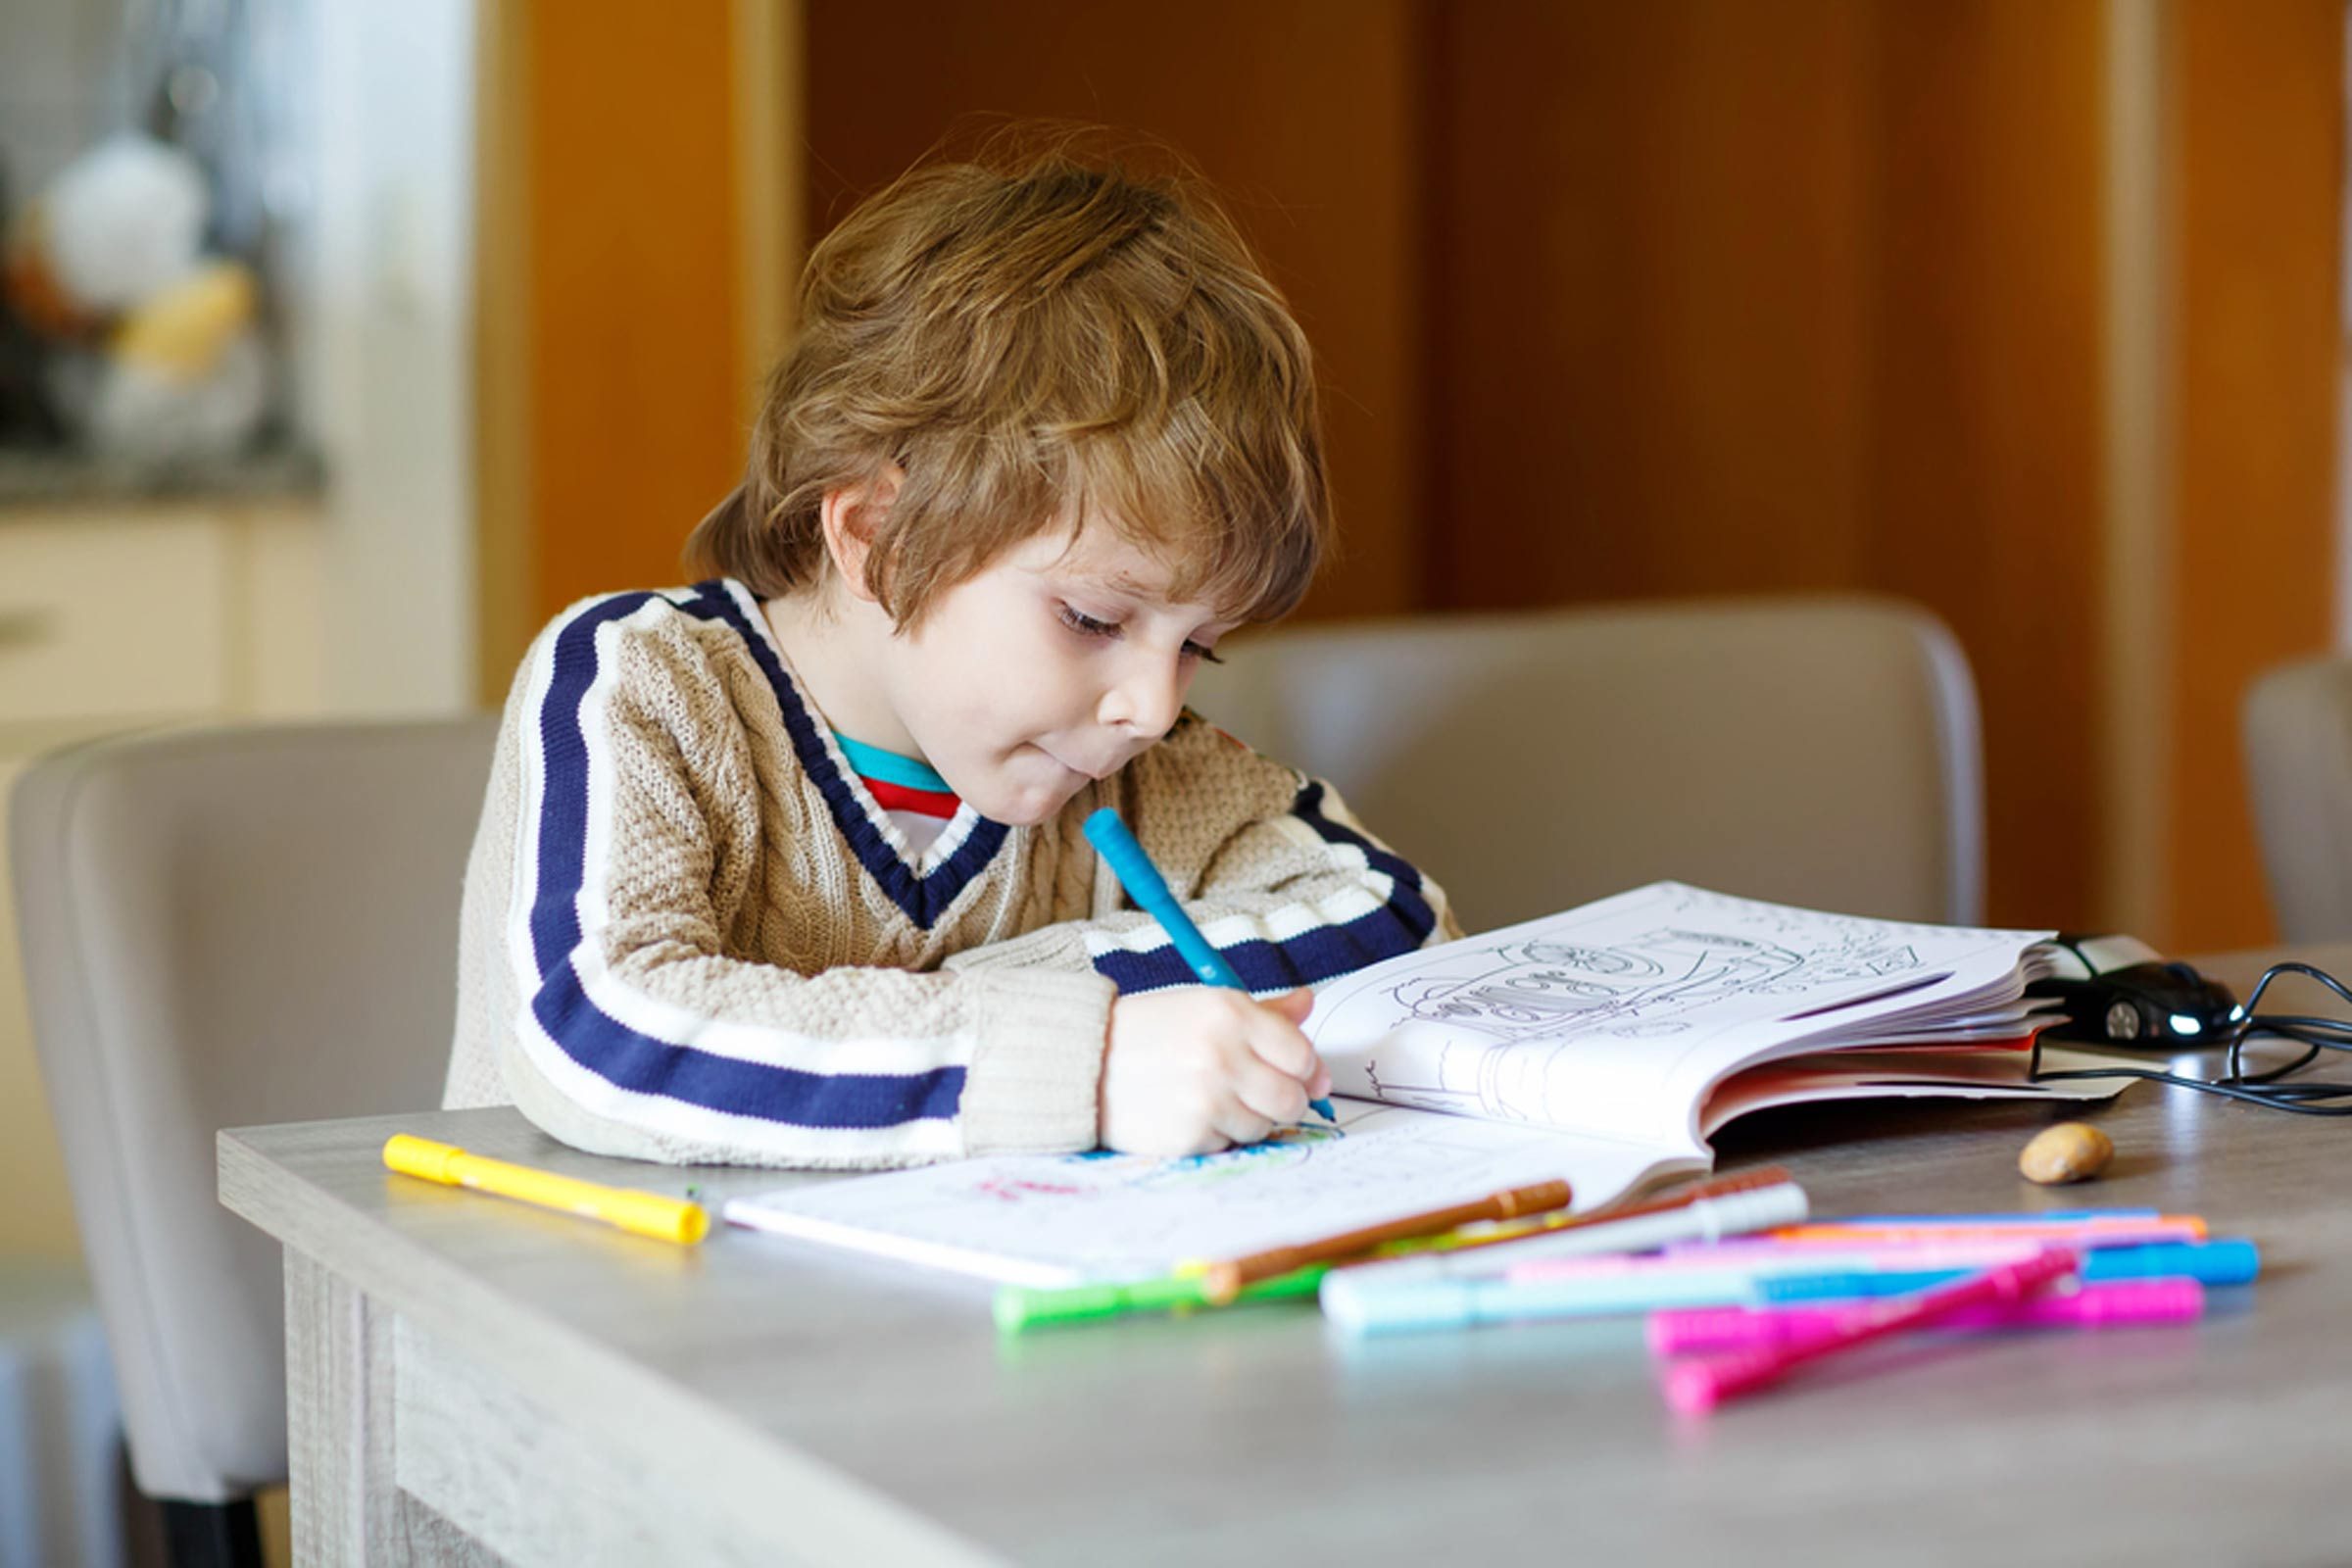 Should parents help their kids with homework?